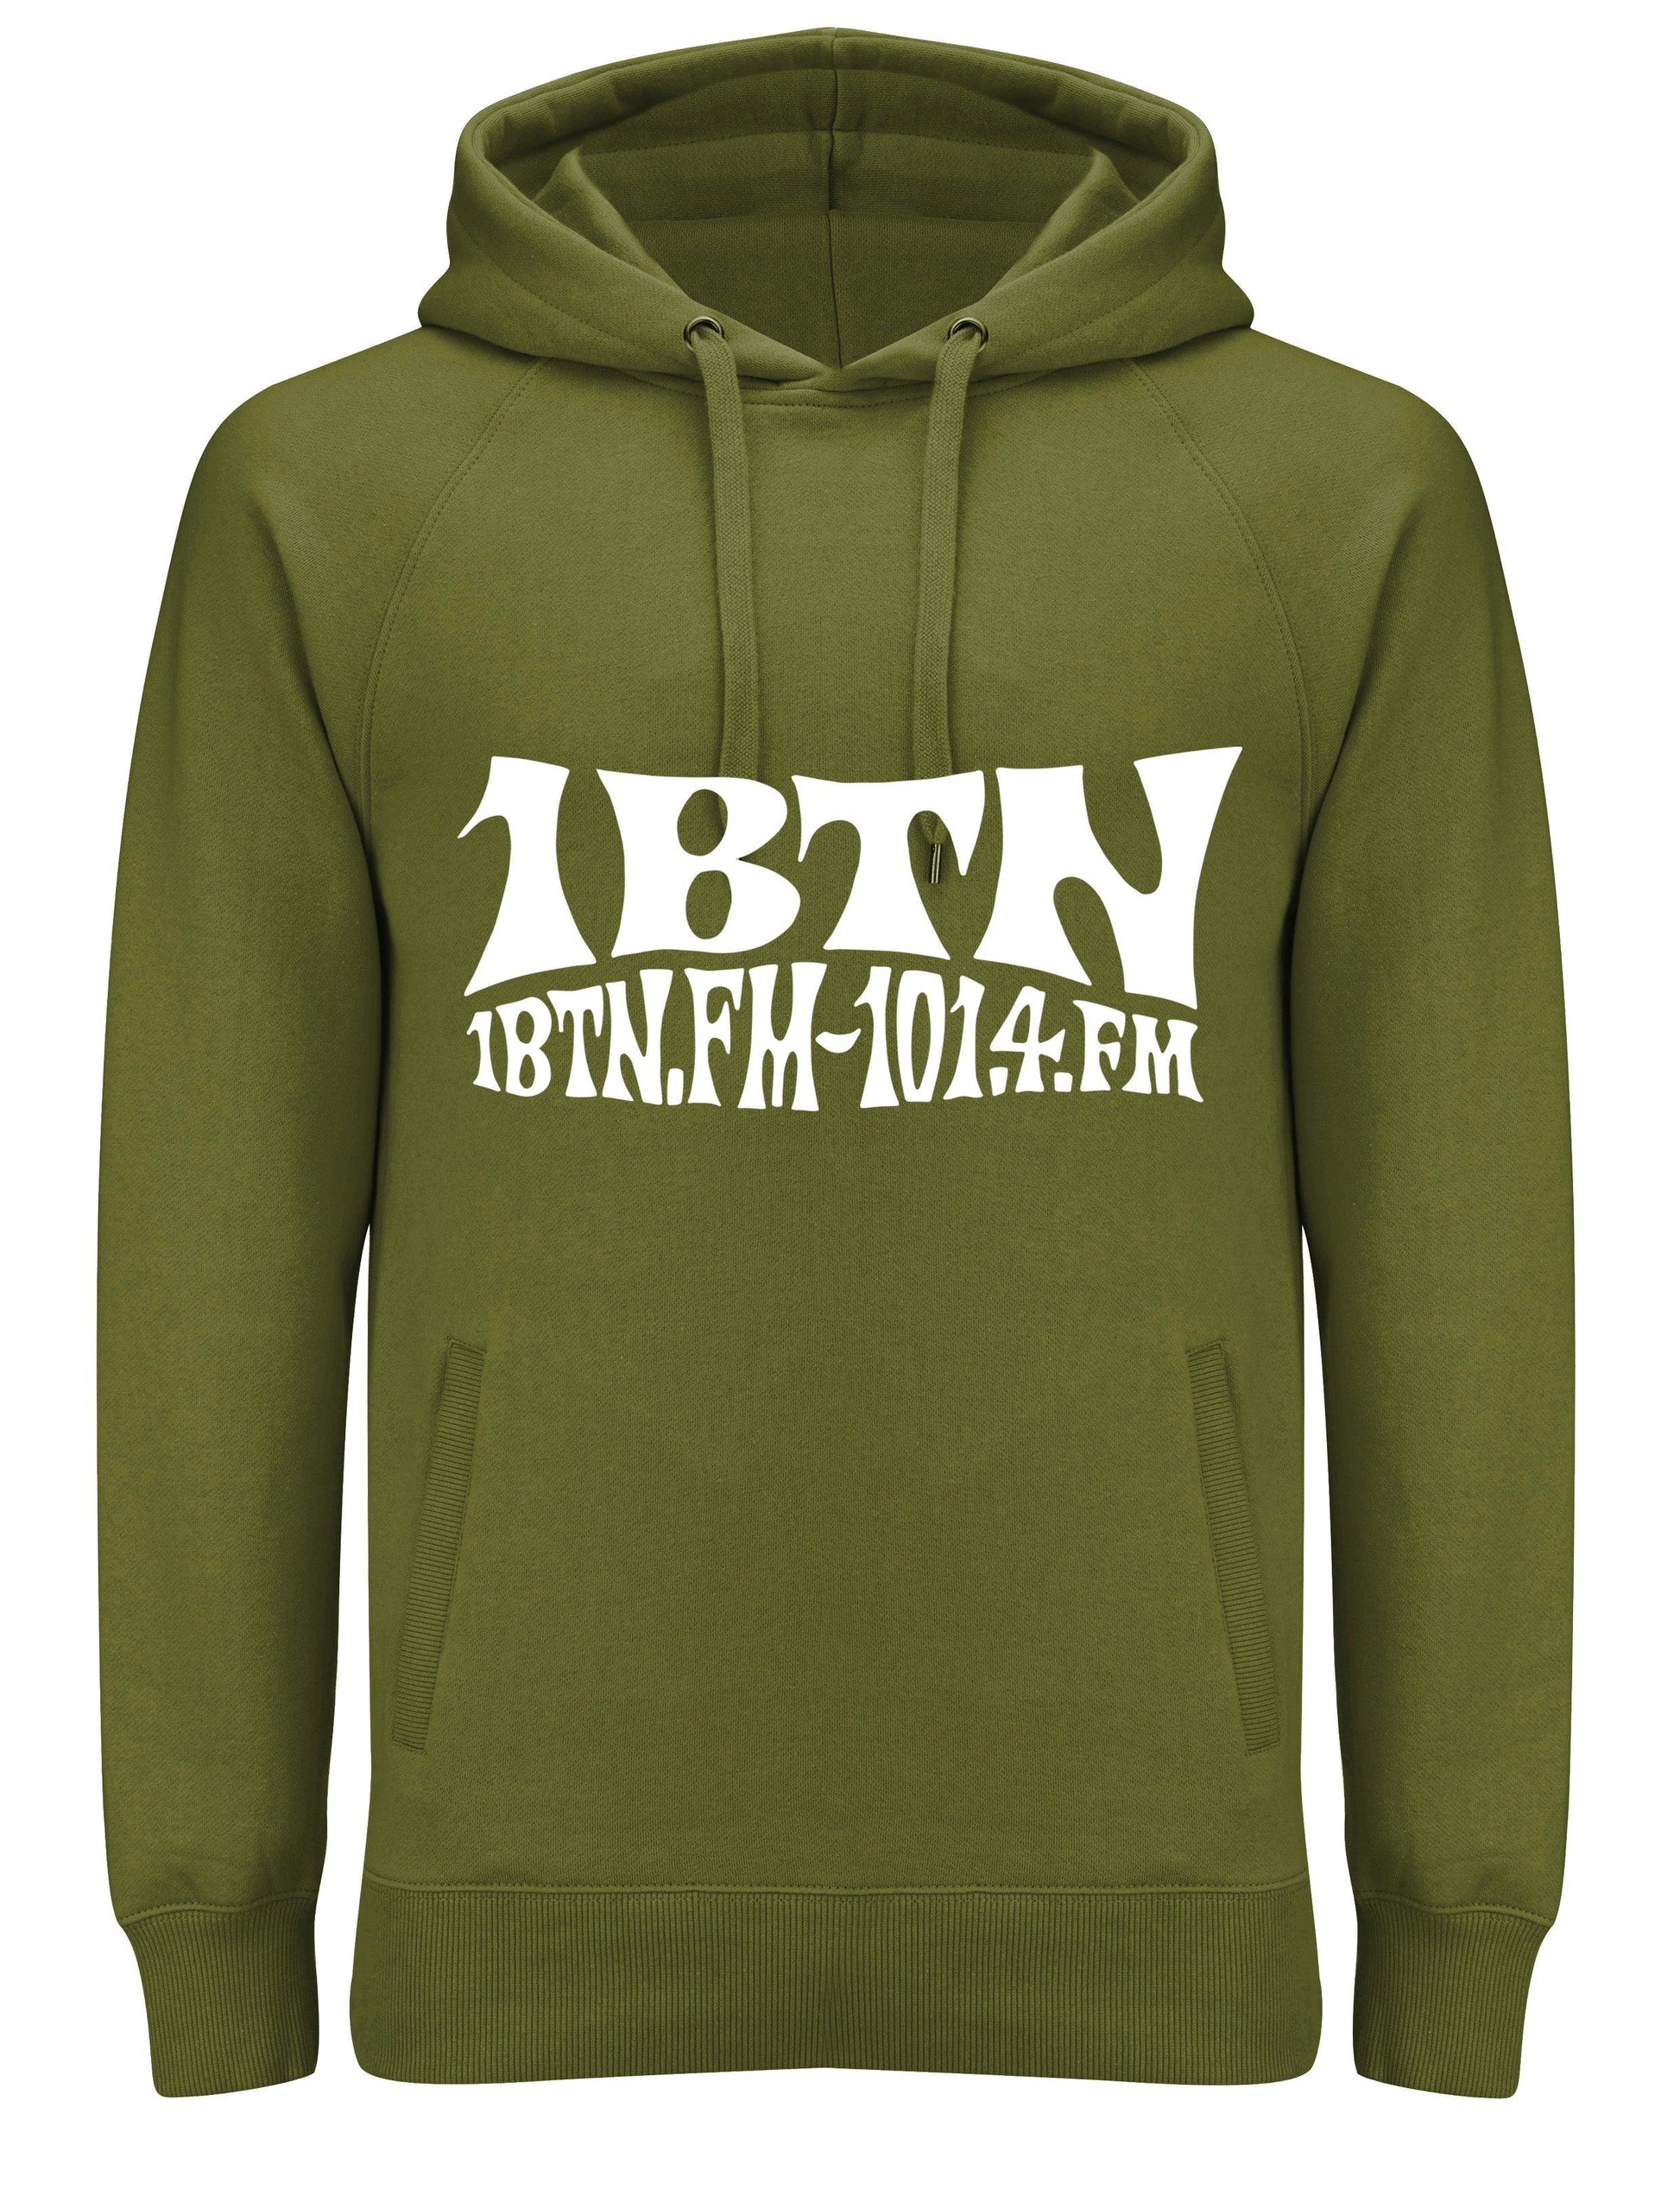 1BTN.FM 101.4 by Swifty:: Hoodie Official Merchandise of 1BTN.FM (5 Colour Options) - SOUND IS COLOUR